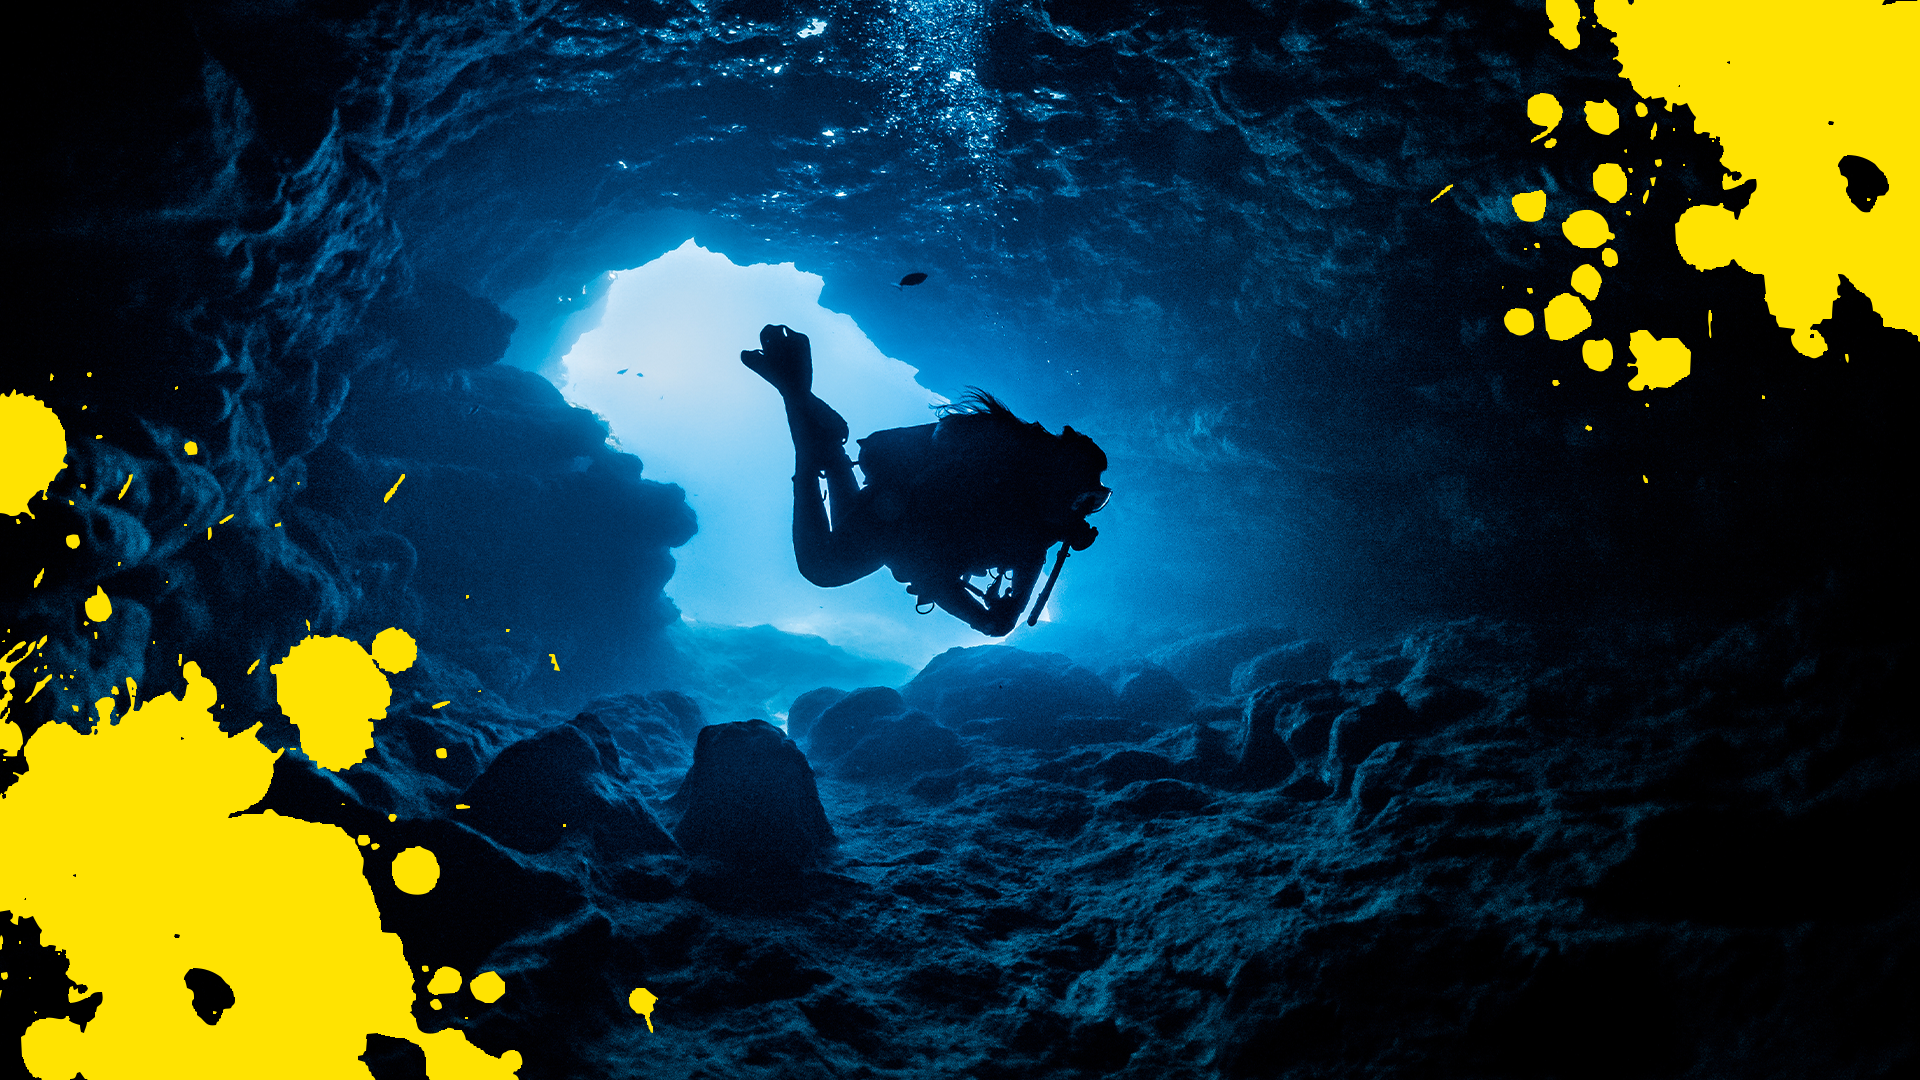 Diver in underwater cave and splats